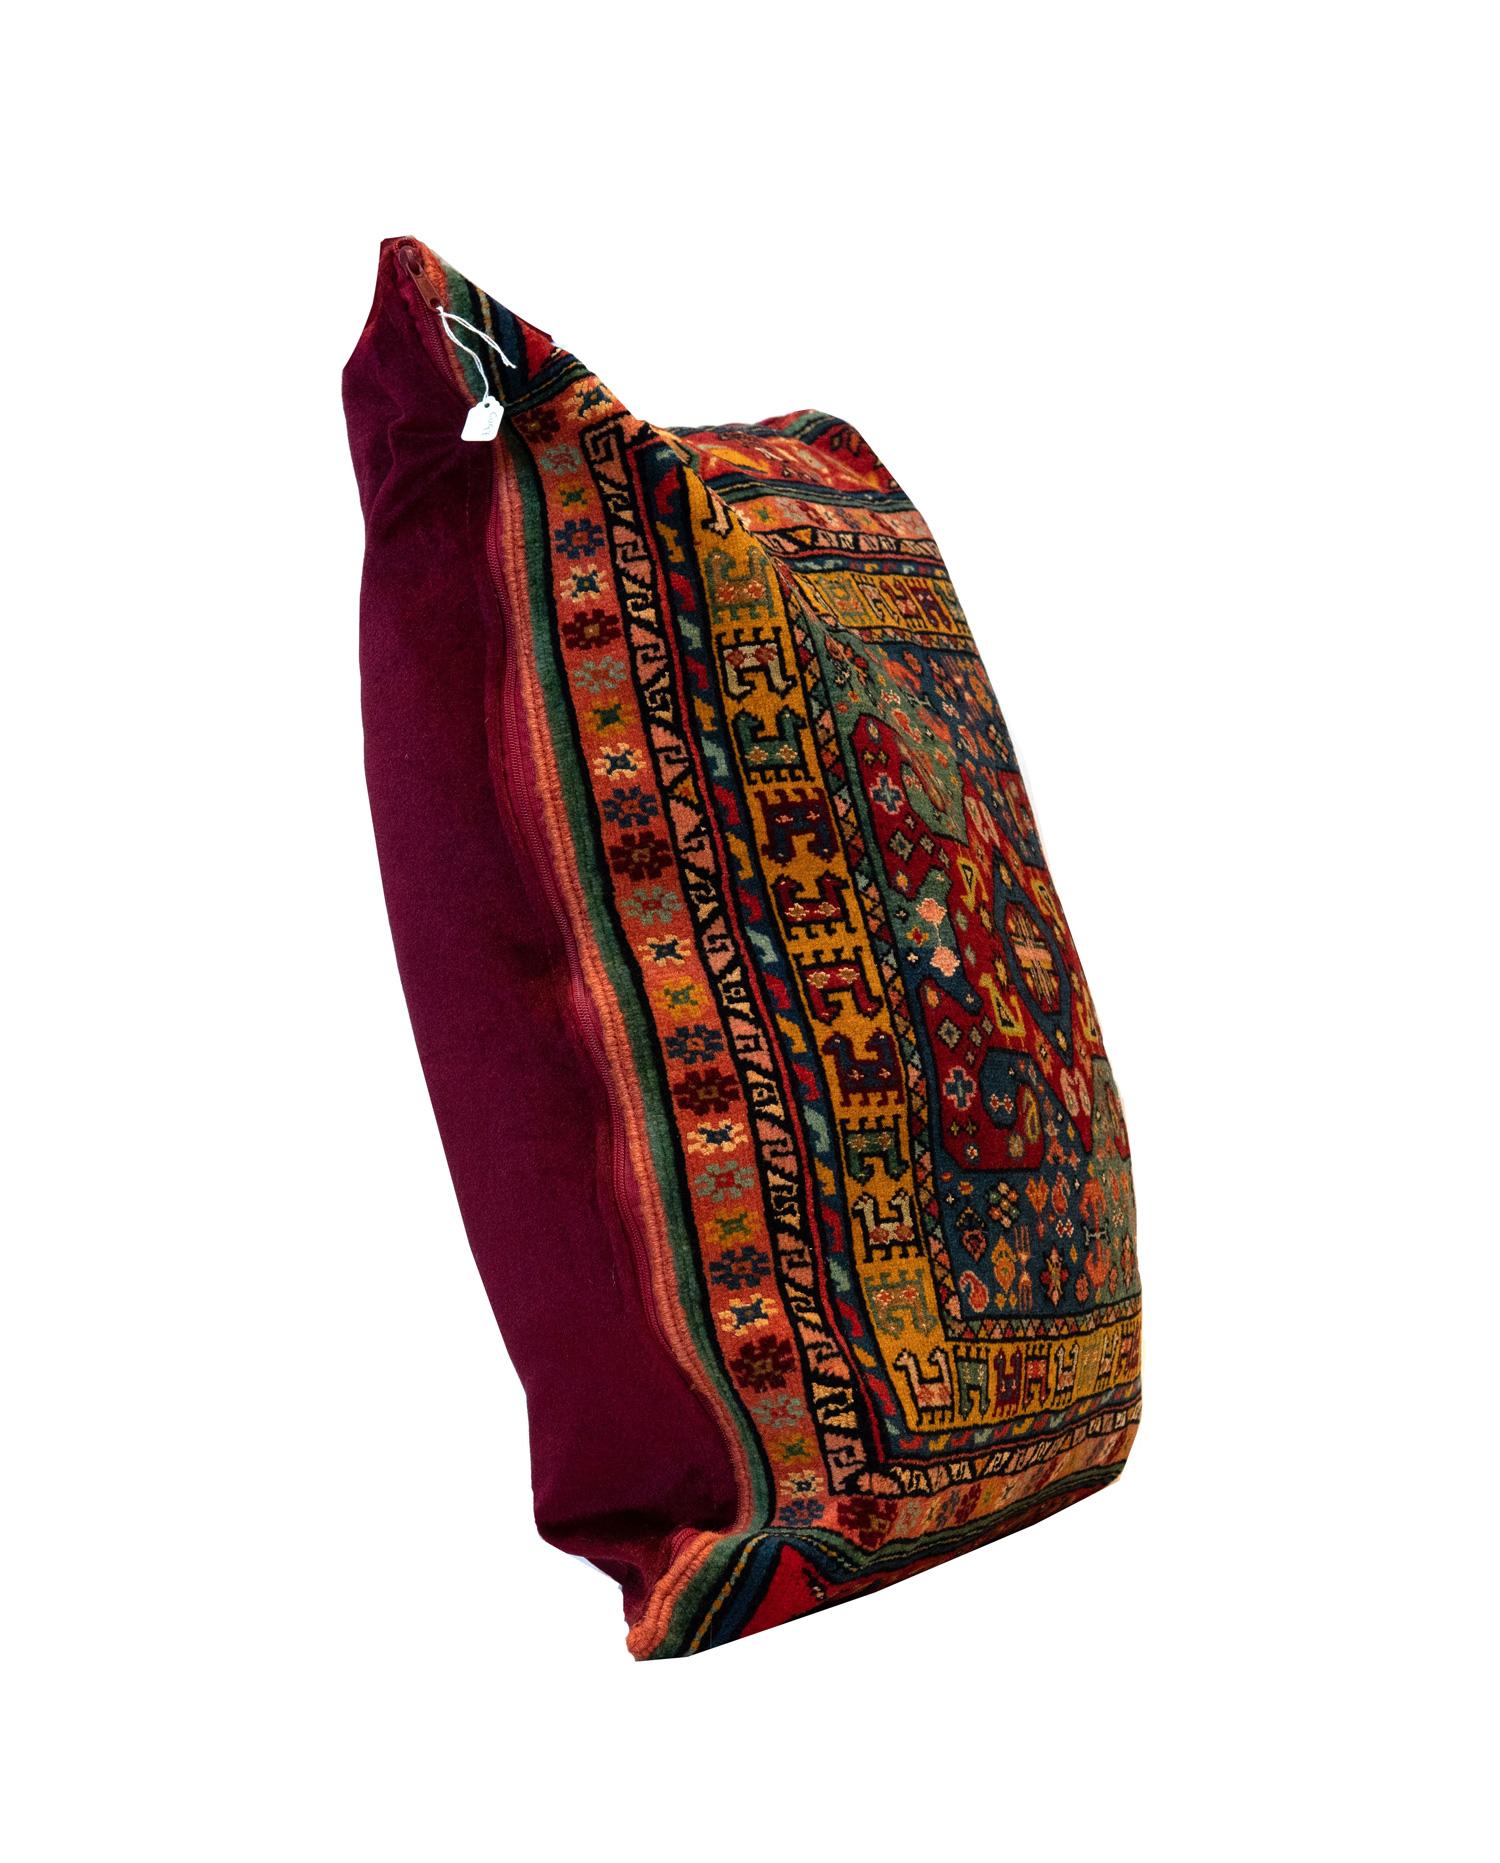 Hand-Crafted Handmade Tribal Pillow Cover, Traditional Pillow Carpet Floor Cushion